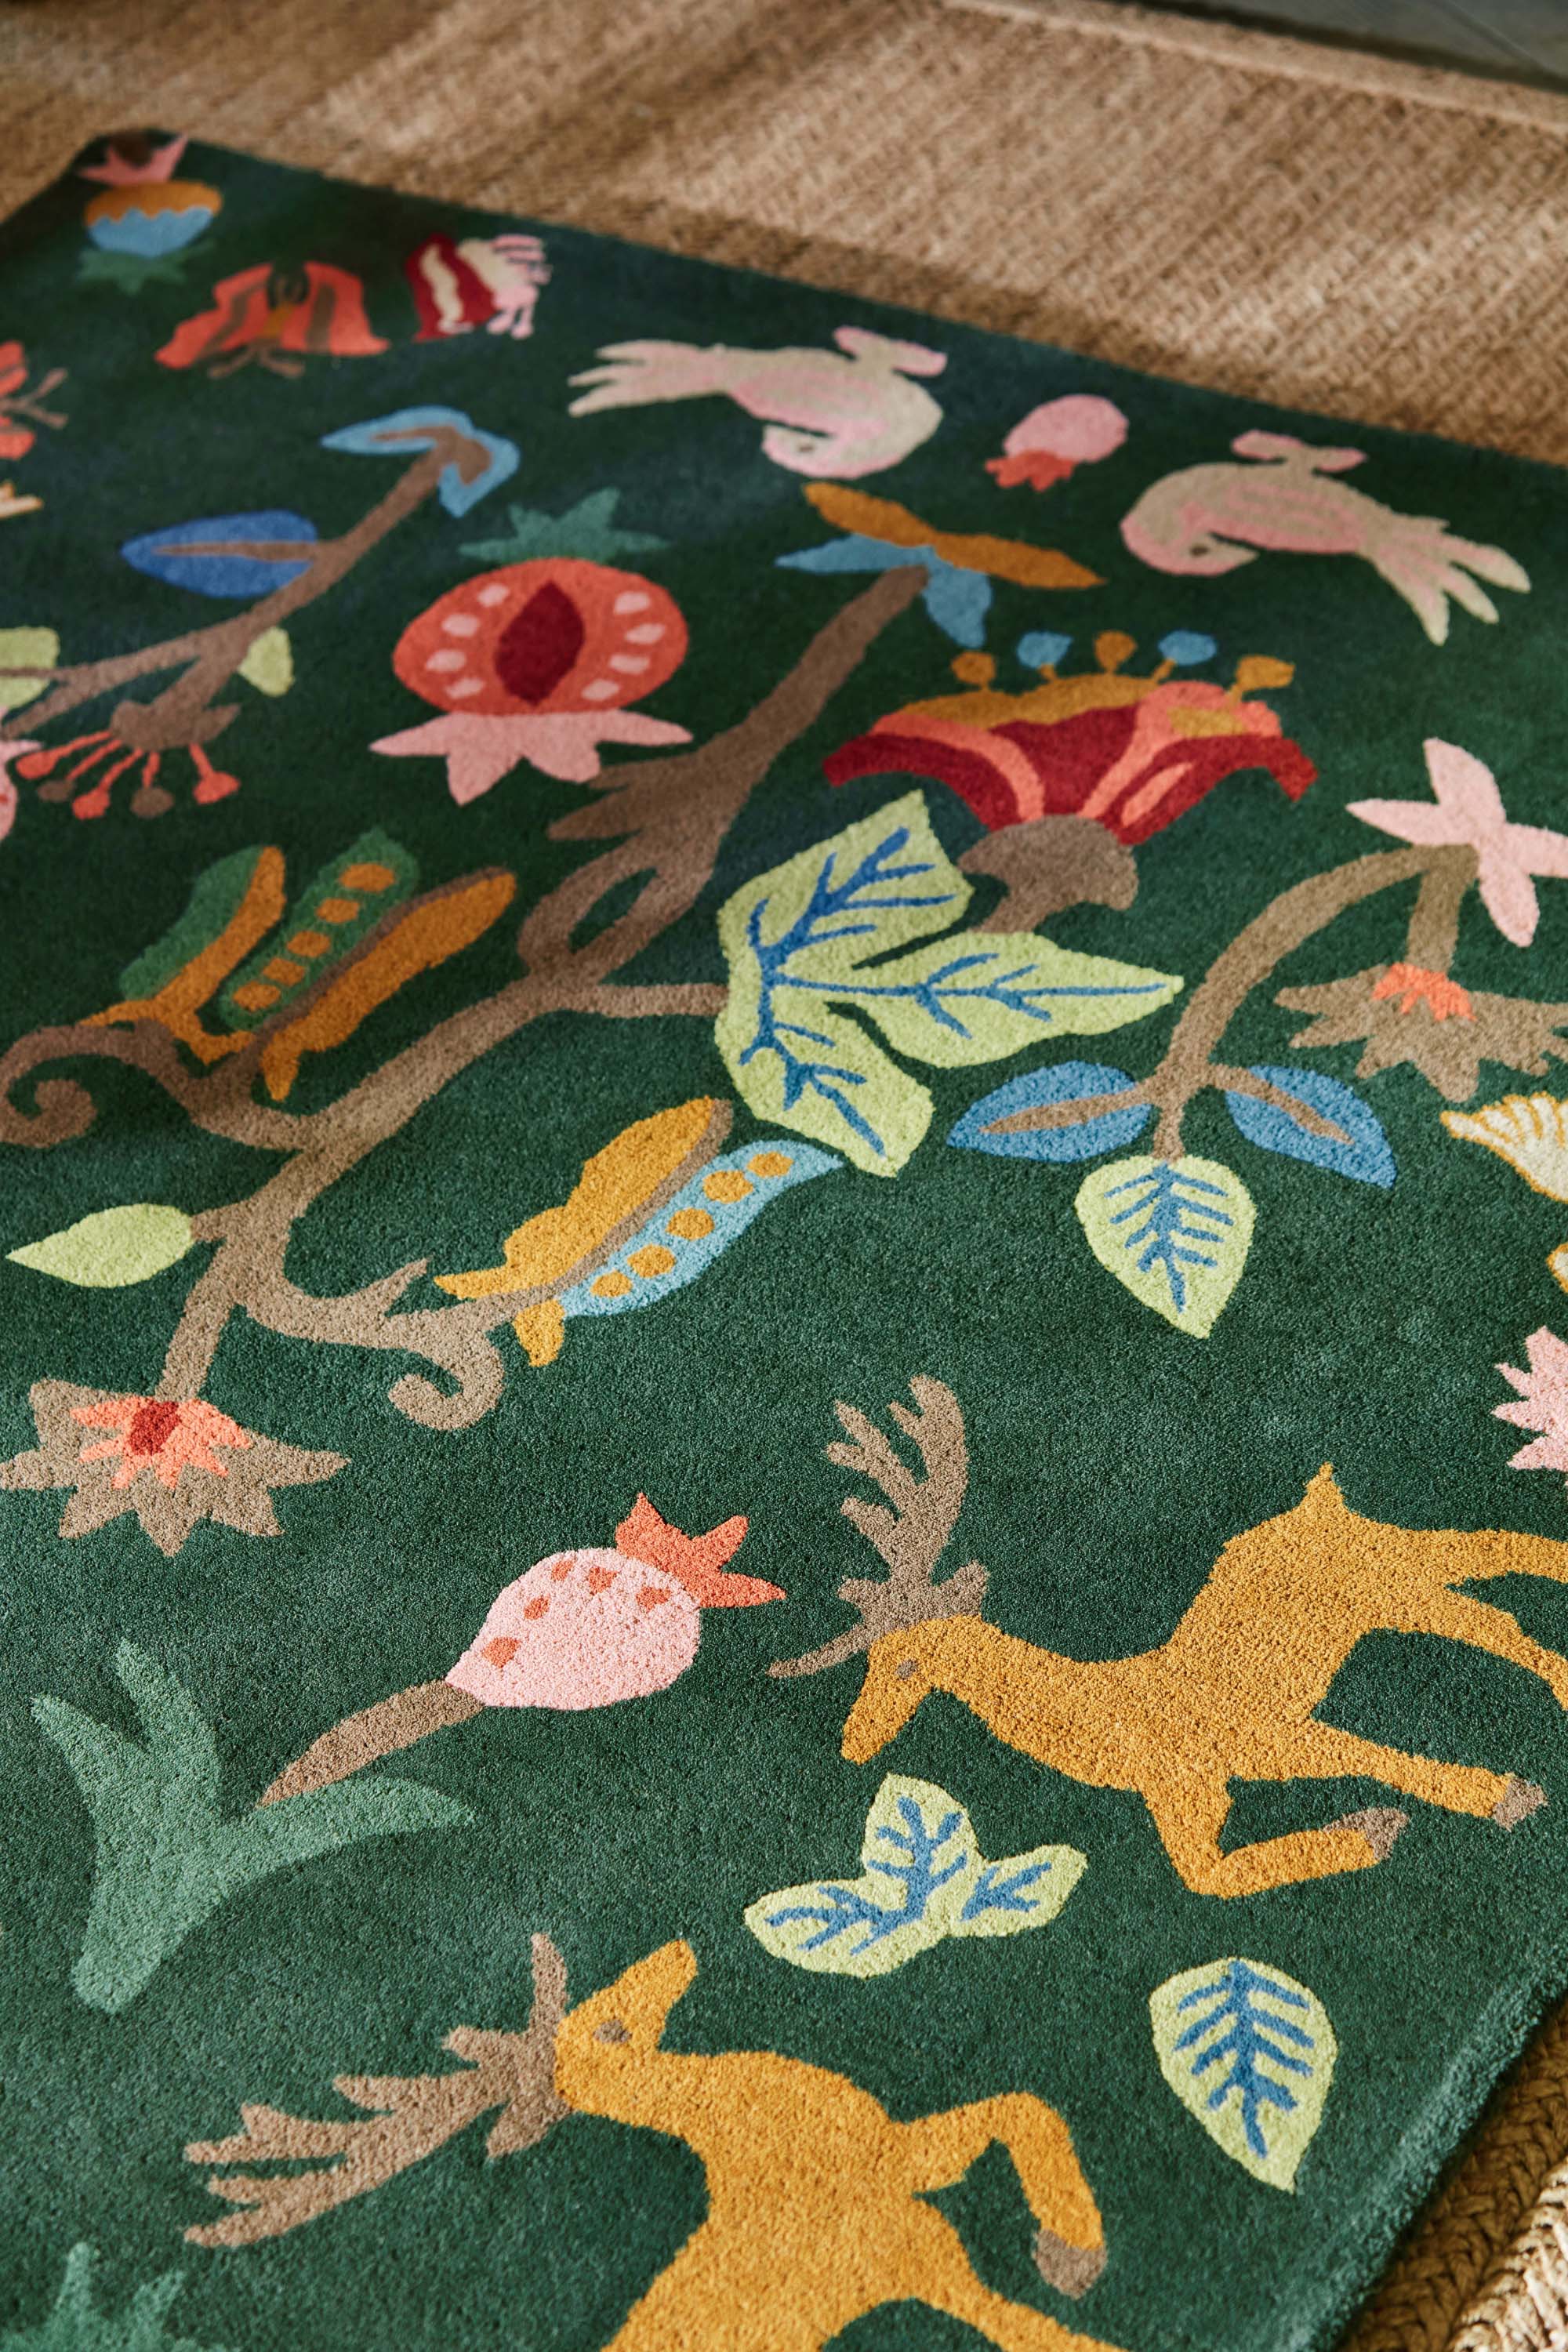 Green rug with woodland motif